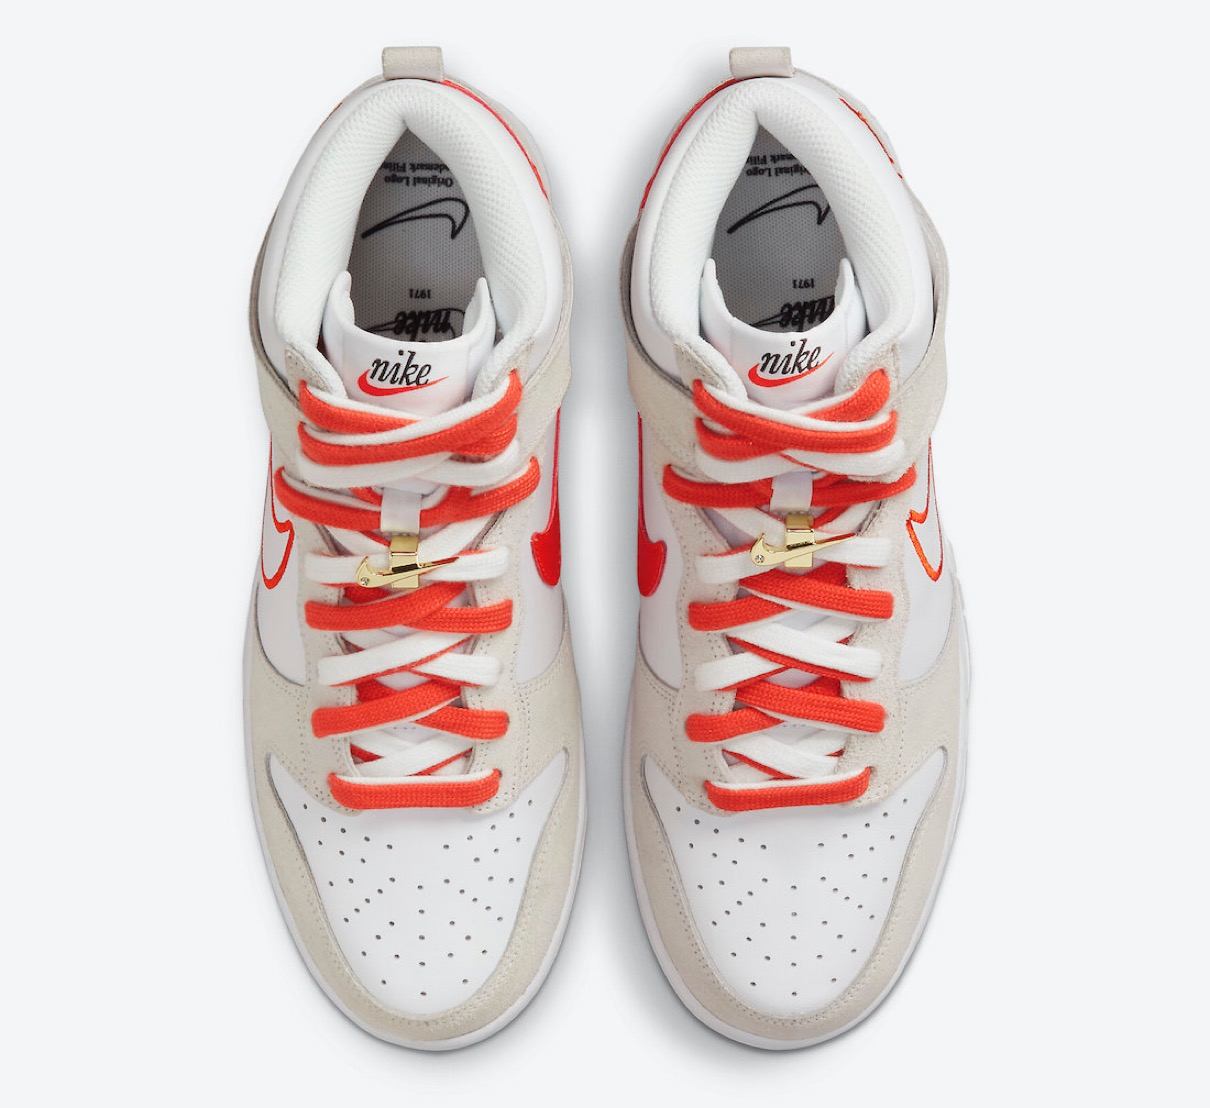 Nike】Dunk High SE “First Use” Collectionが国内7月8日に発売予定